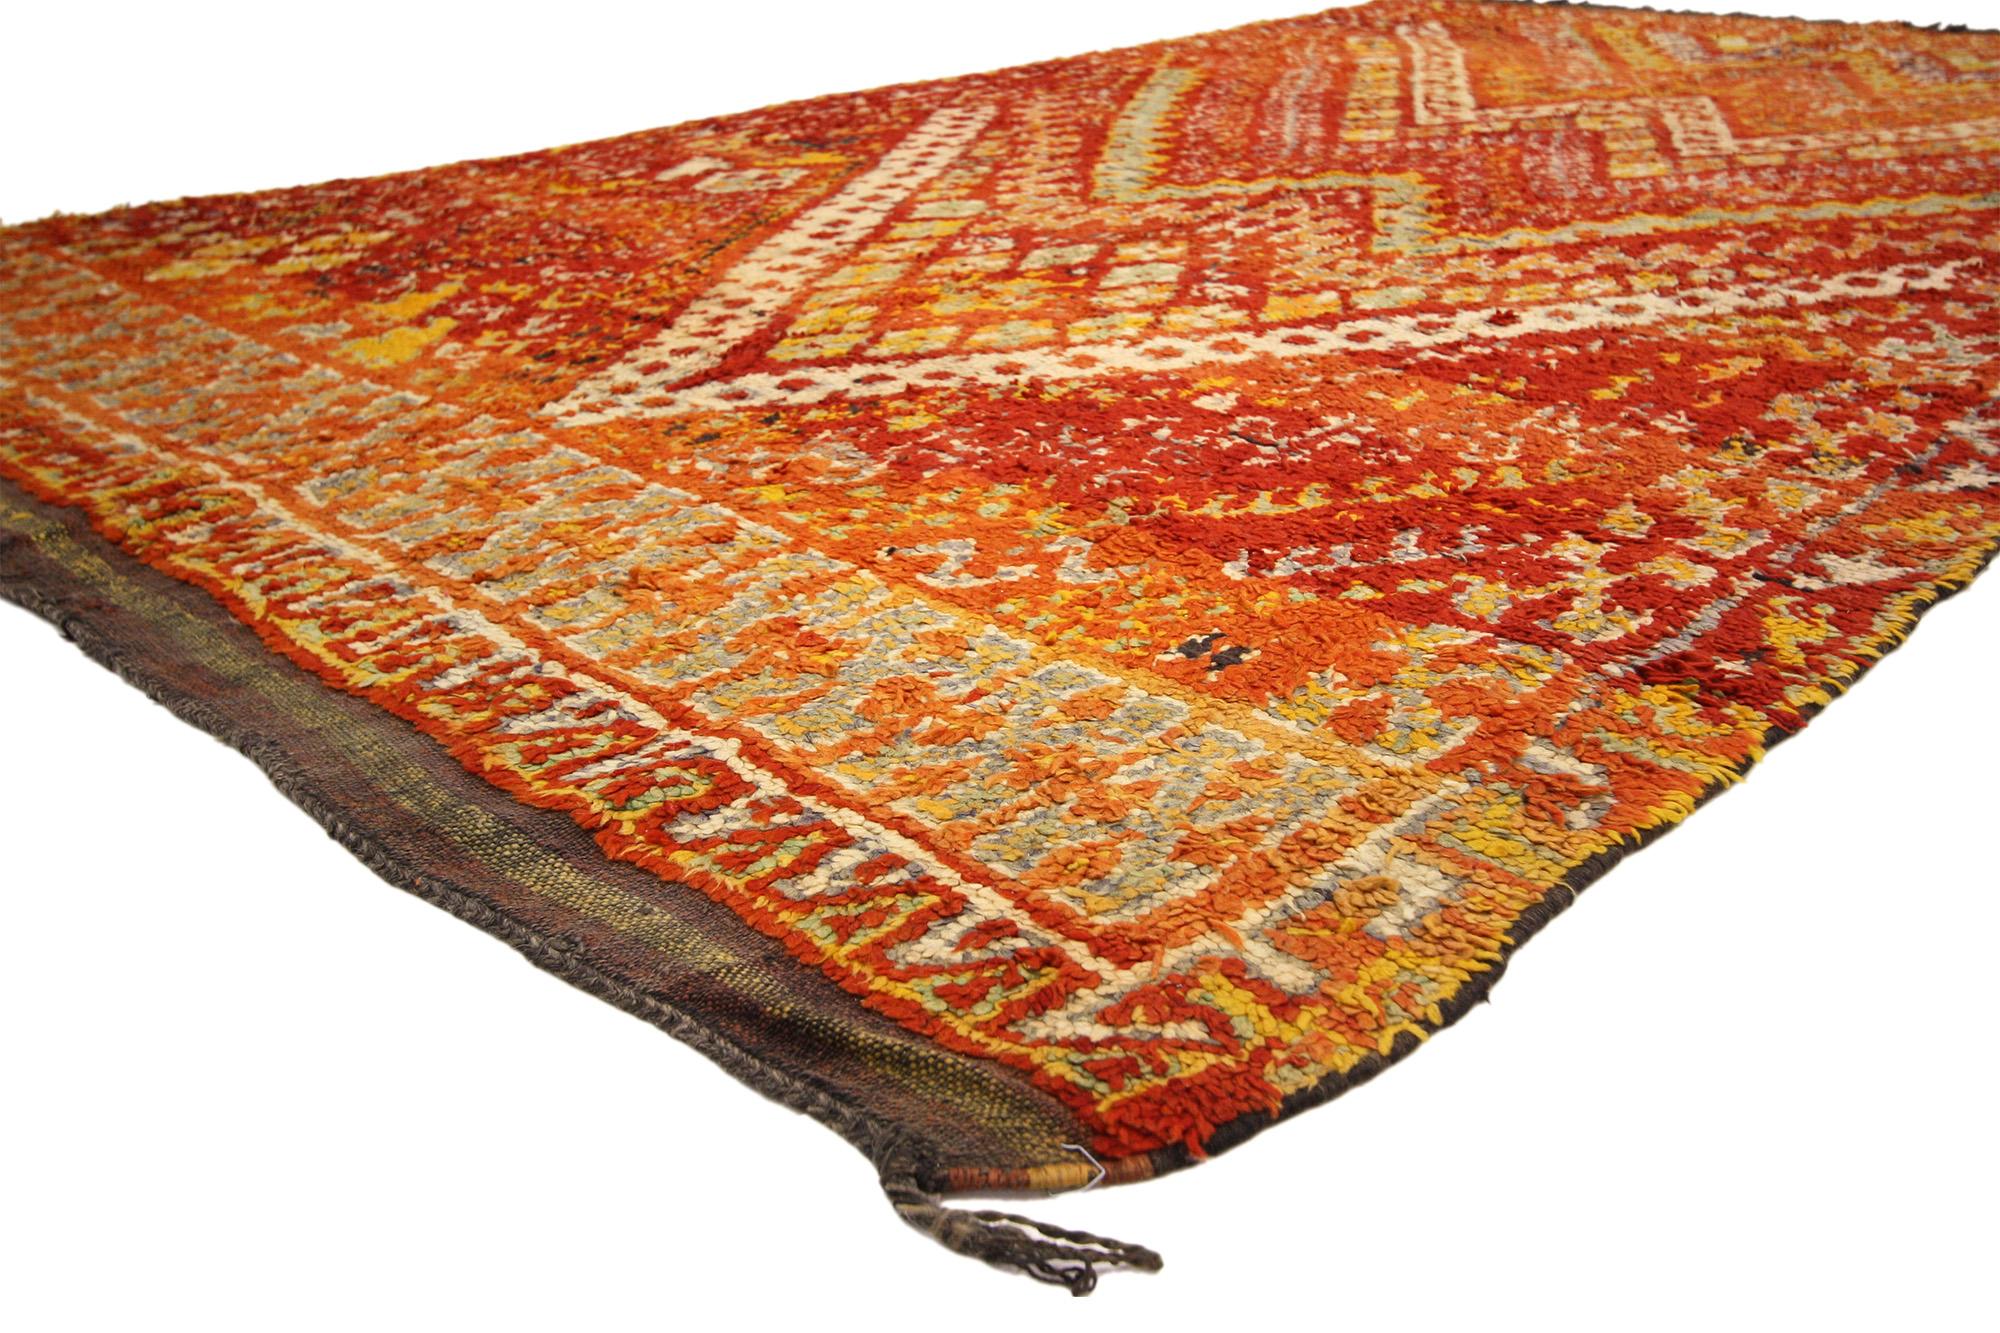 74729 Vintage Beni MGuild Moroccan Rug, 06'02 x 10'05. Nestled in the Middle Atlas Mountains of Morocco, Beni M'Guild rugs are emblematic of a cherished tradition deeply ingrained within Berber culture. Handcrafted by skilled Berber women using